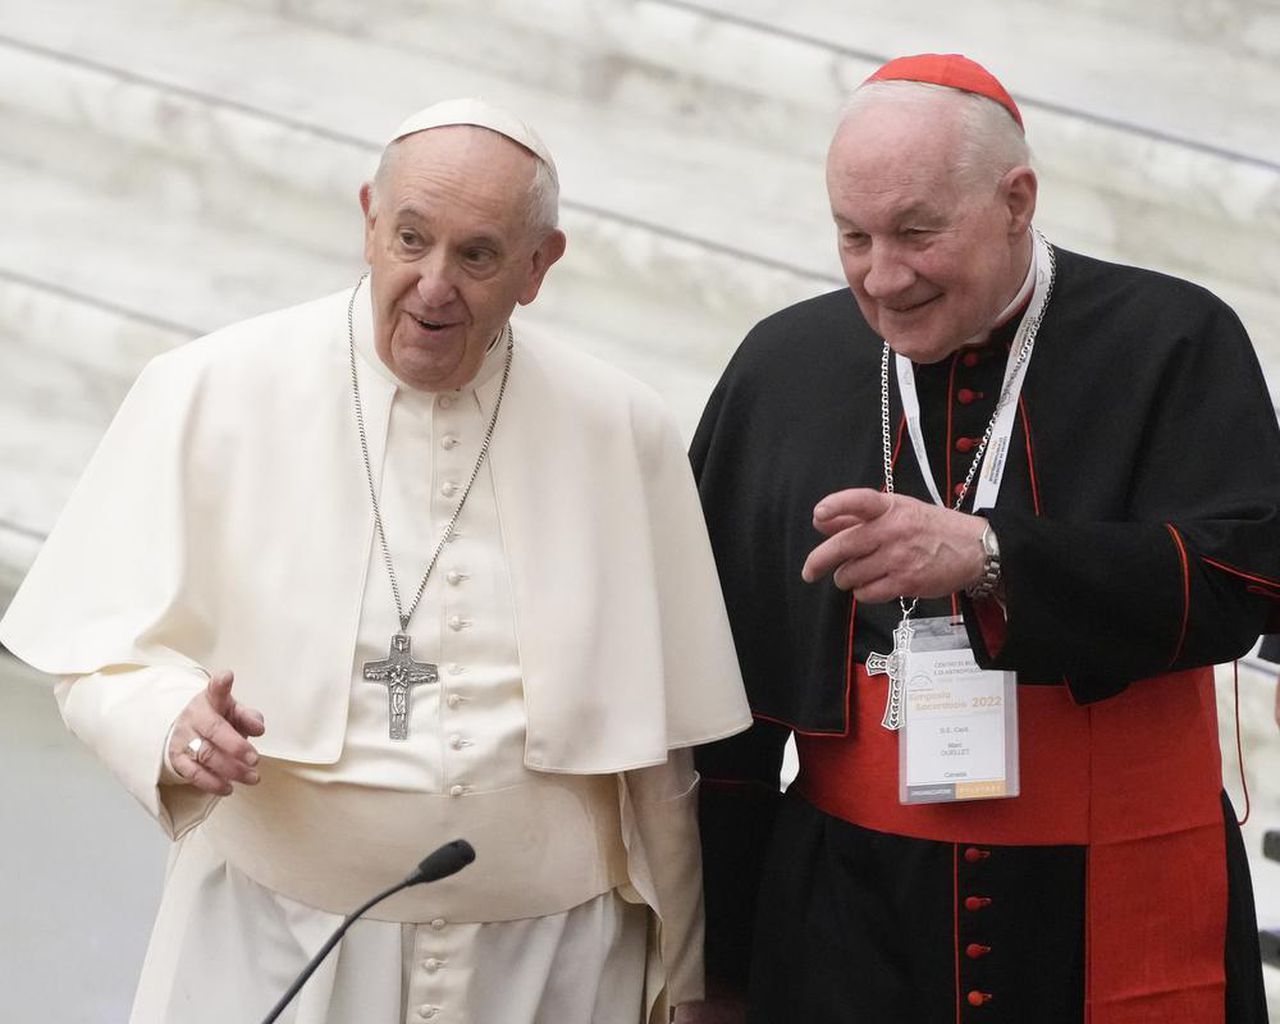 Pope Francis (L) said there are are “no grounds” to conduct an investigation into sexual misconduct by Canadian Cardinal Marc Ouellet, after a woman filed a class action lawsuit against the Canadian.